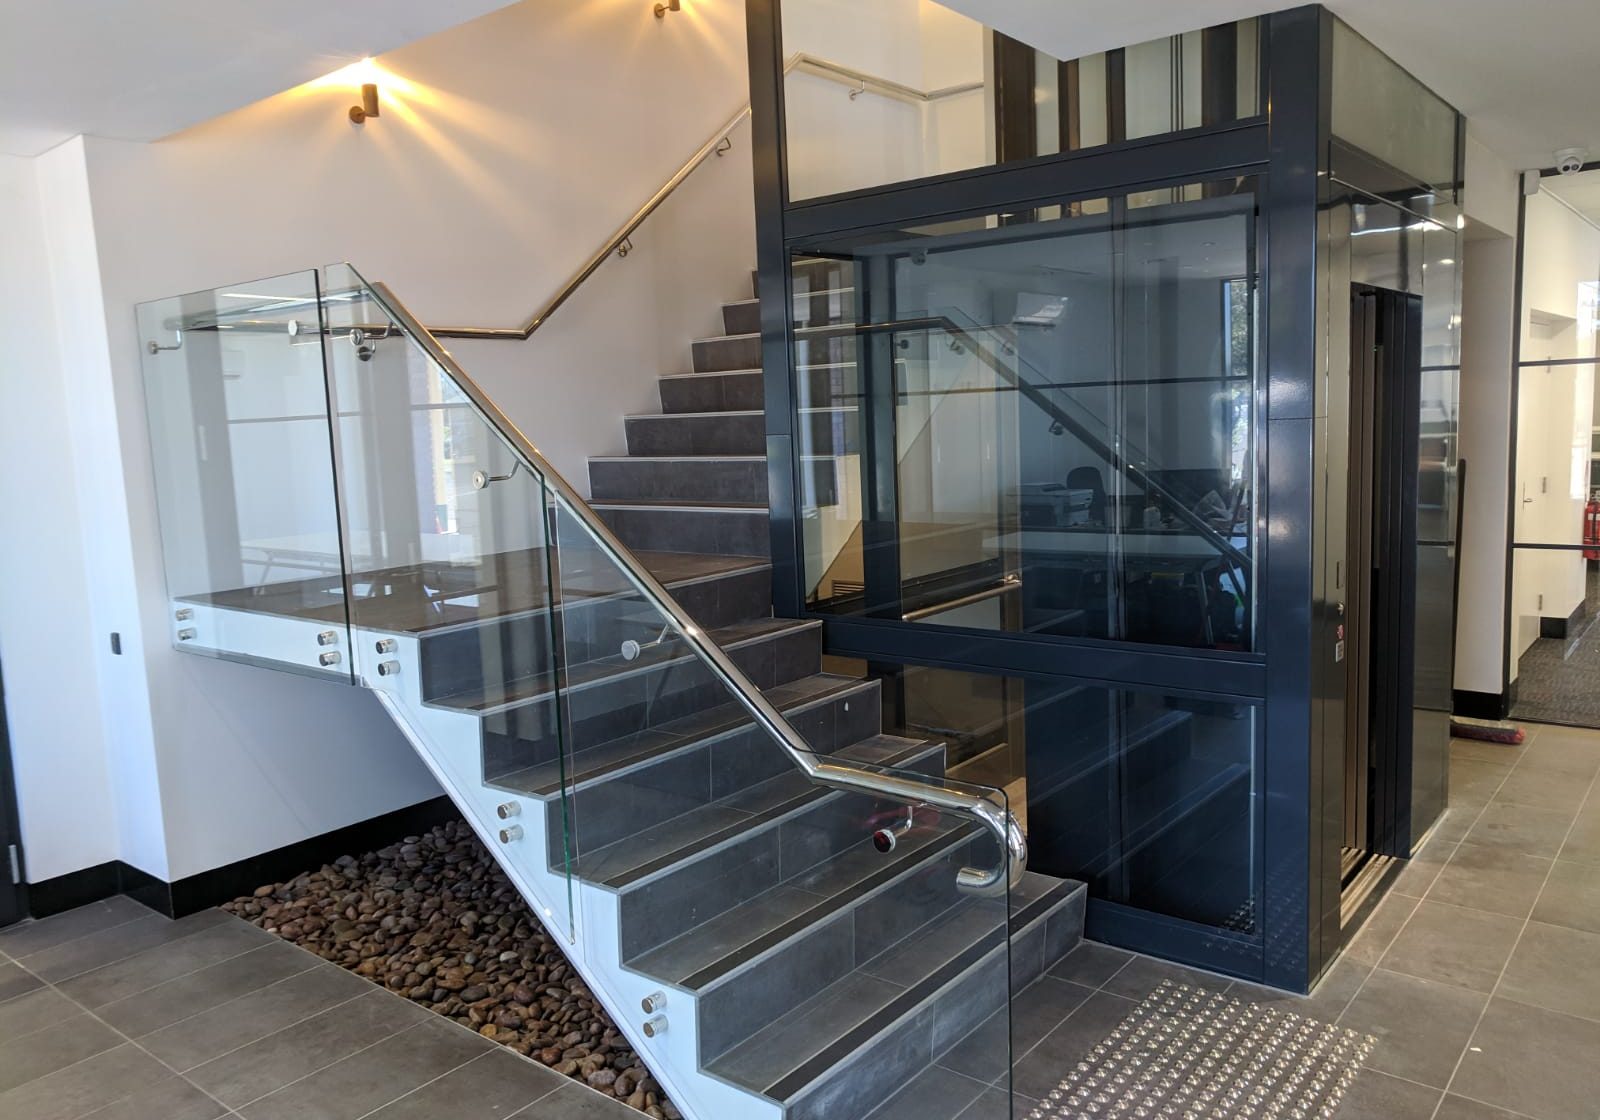 Katanning commercial lift with stairs wrapping around it